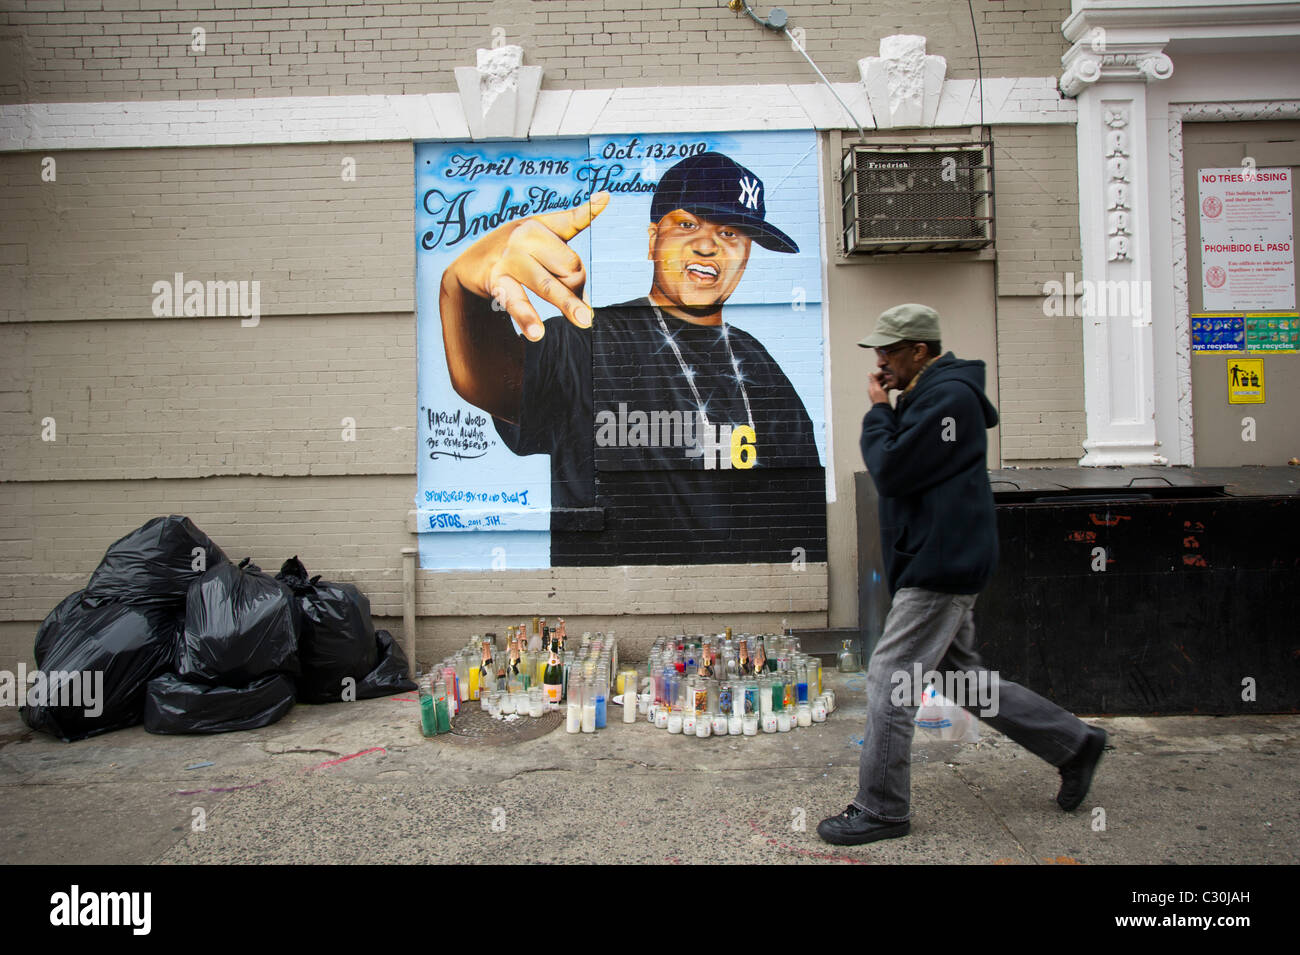 A mural in remembrance of Andre Hudson, a rap promoter who died October 13, 2010 in a car accident Stock Photo